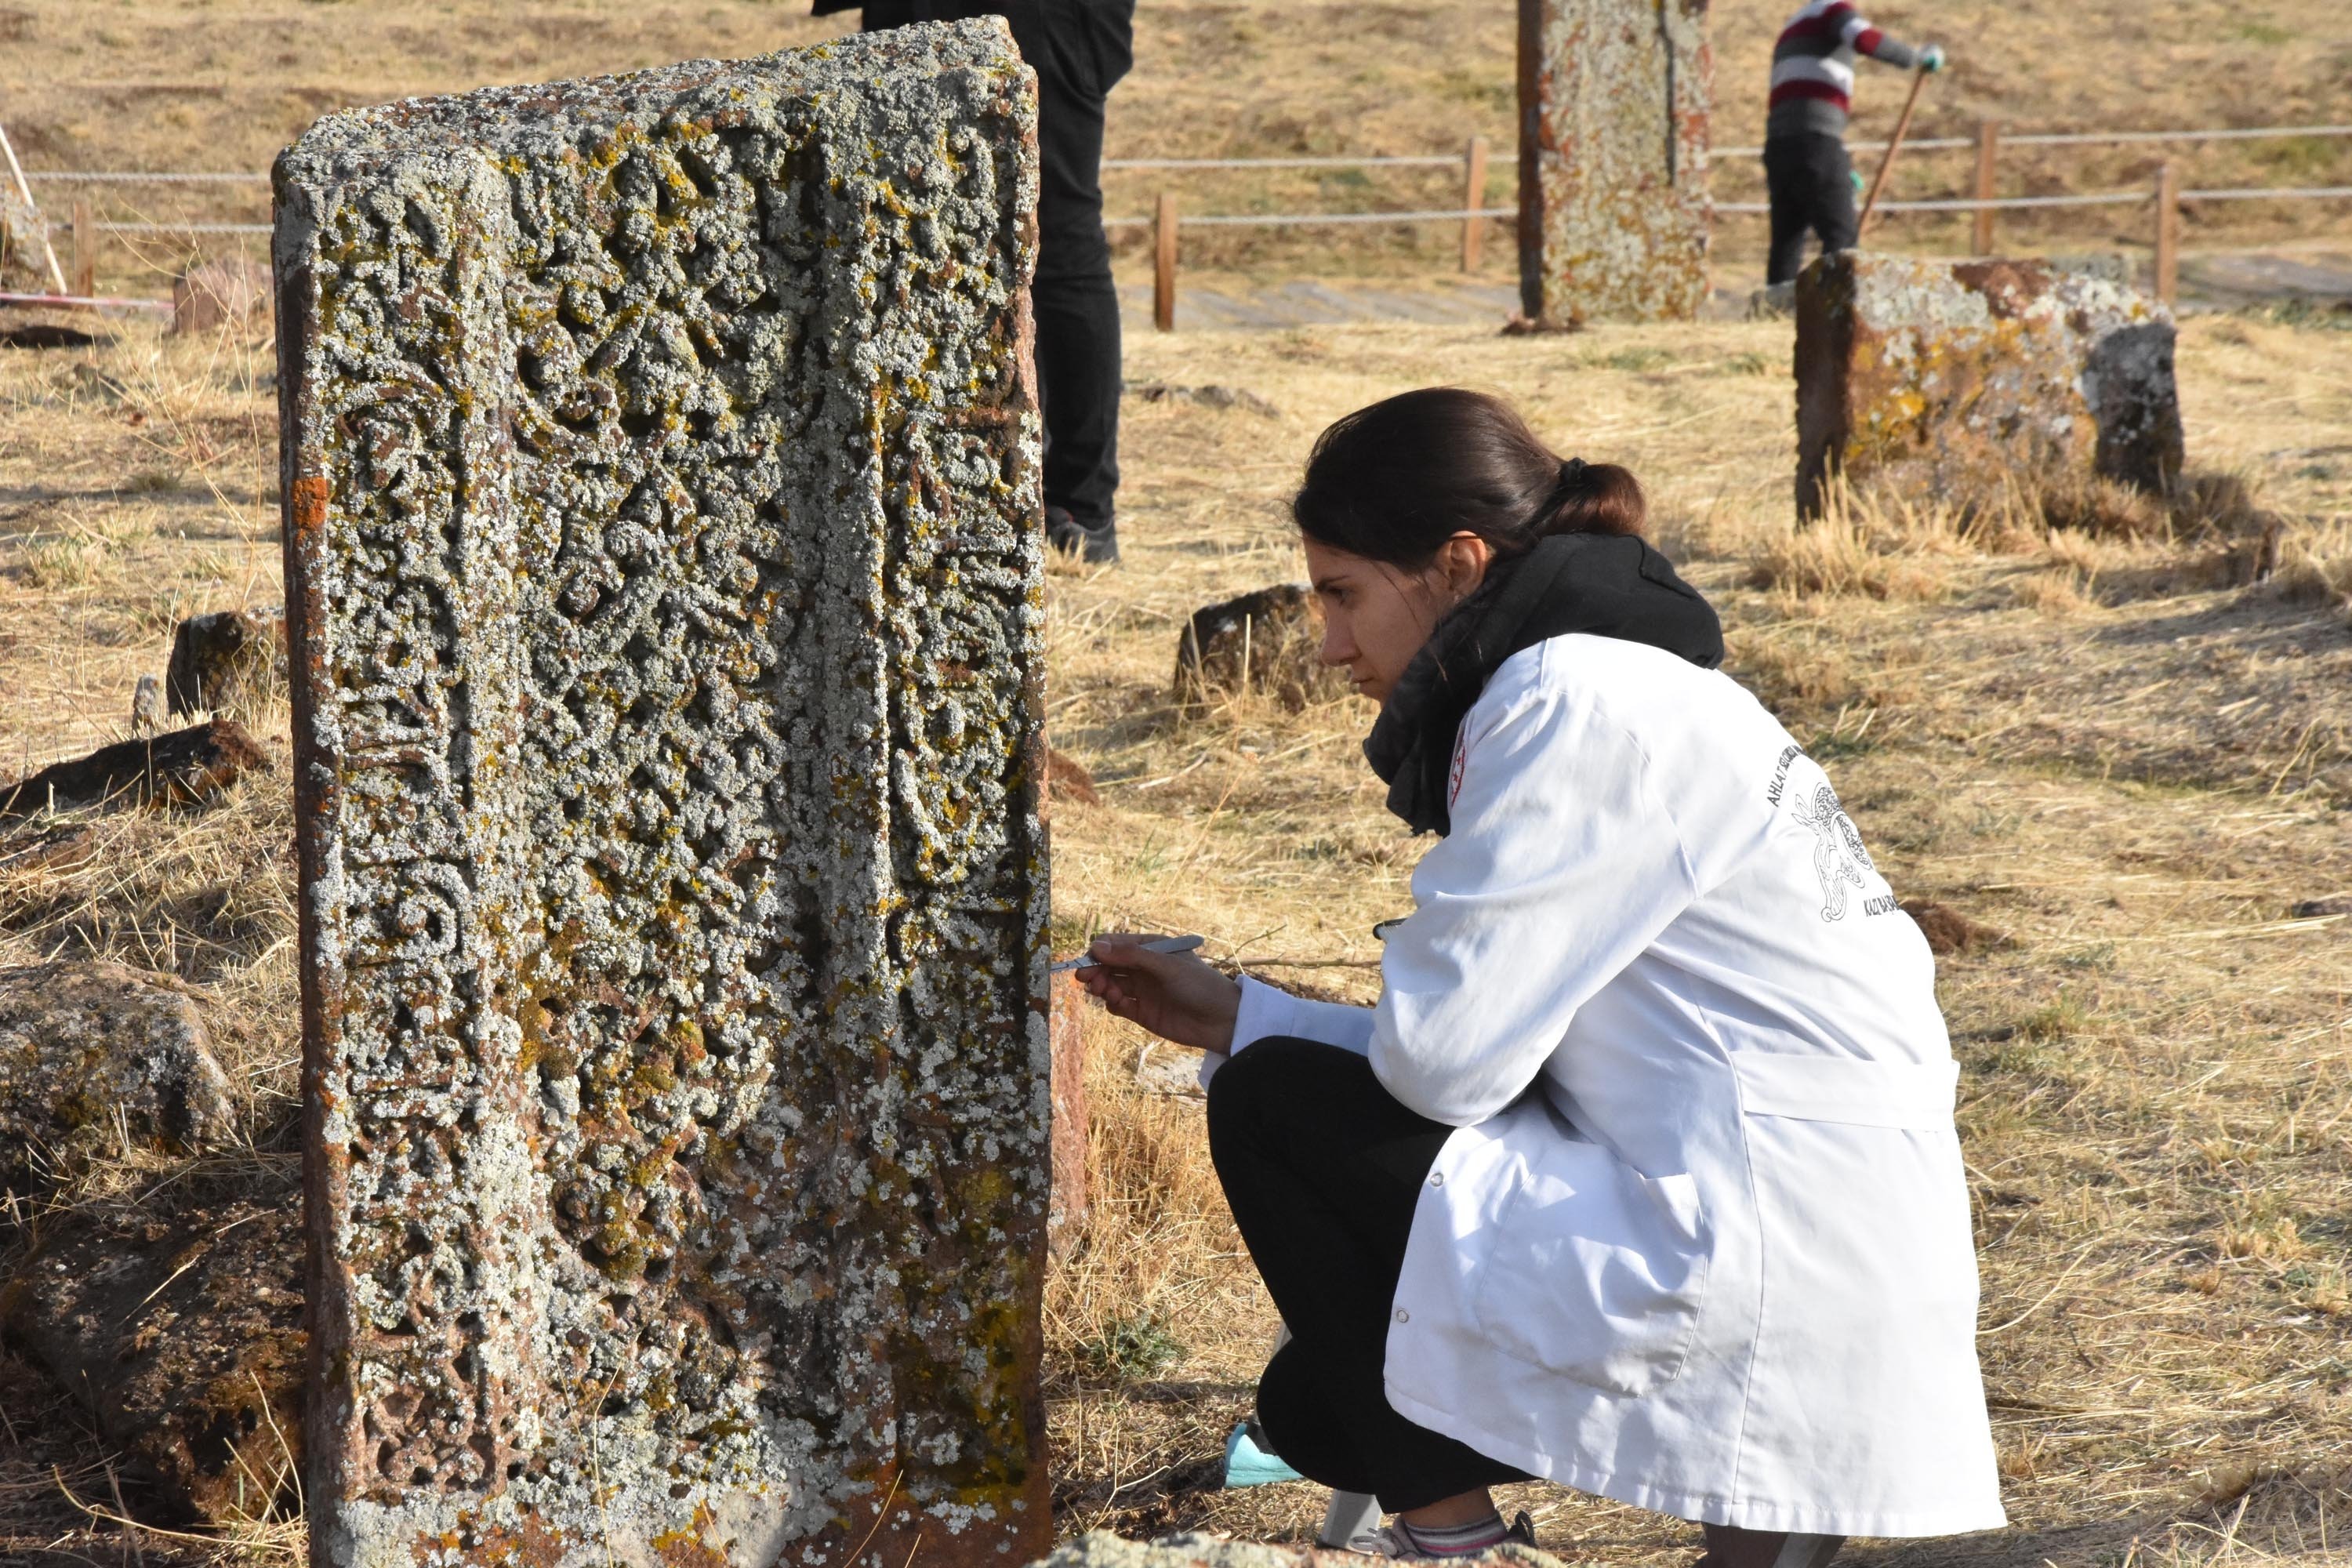 An archaeologist works on a tomb at the Ahlat Seljuk Meydan Cemetery, including tombs of children, in the Ahlat district of Bitlis, Turkey, Nov. 7, 2021. (DHA Photo)